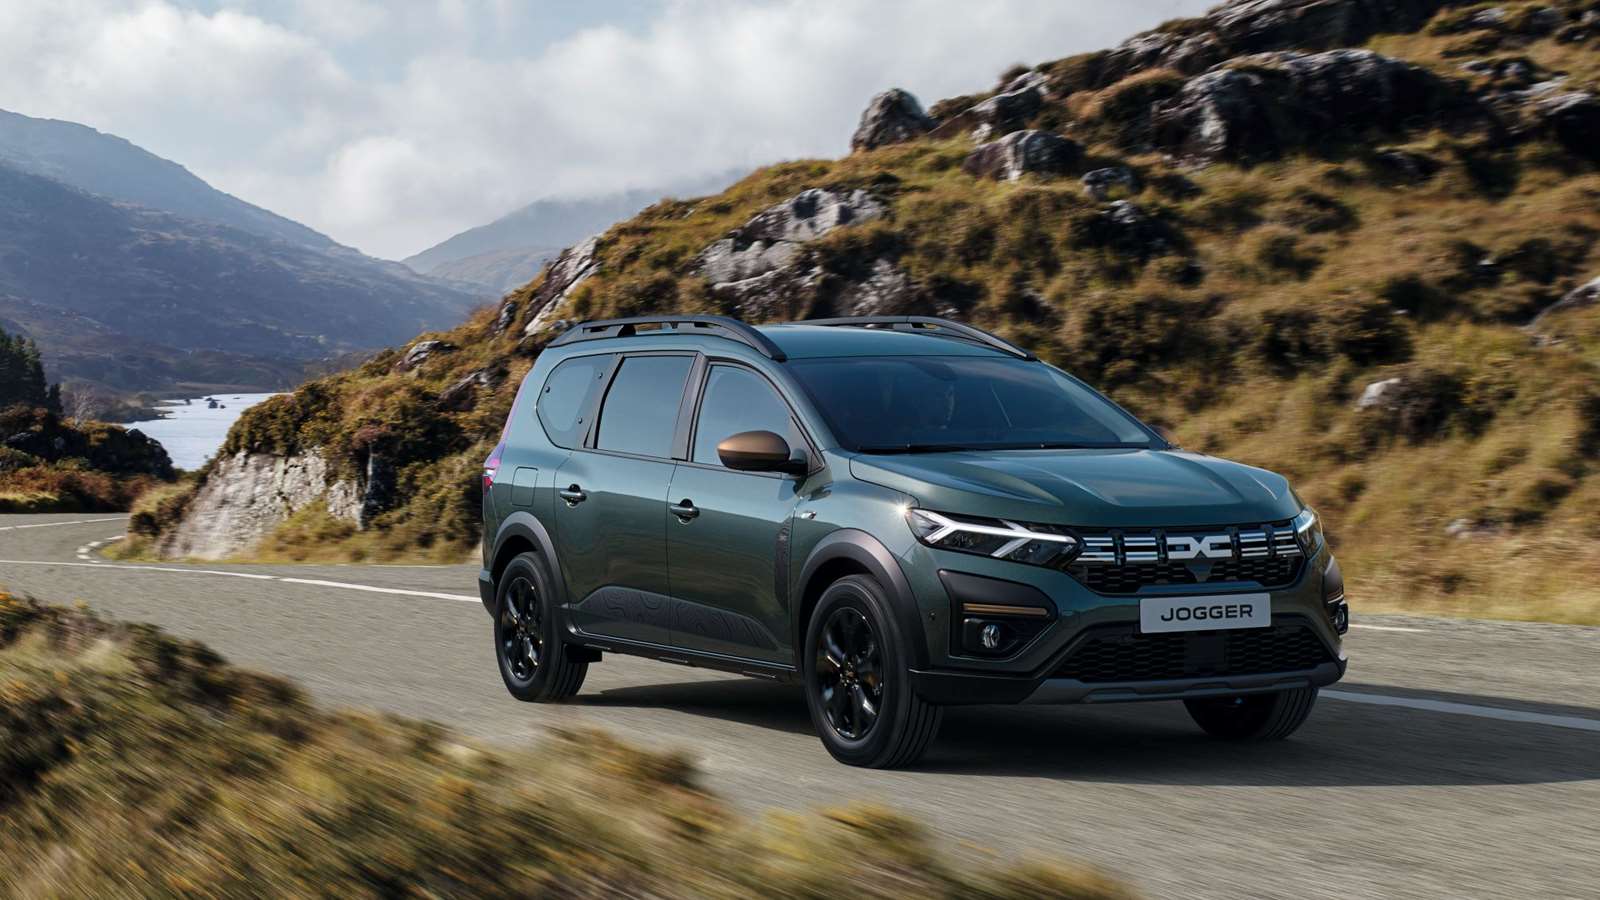 You can now go camping in a Dacia Jogger